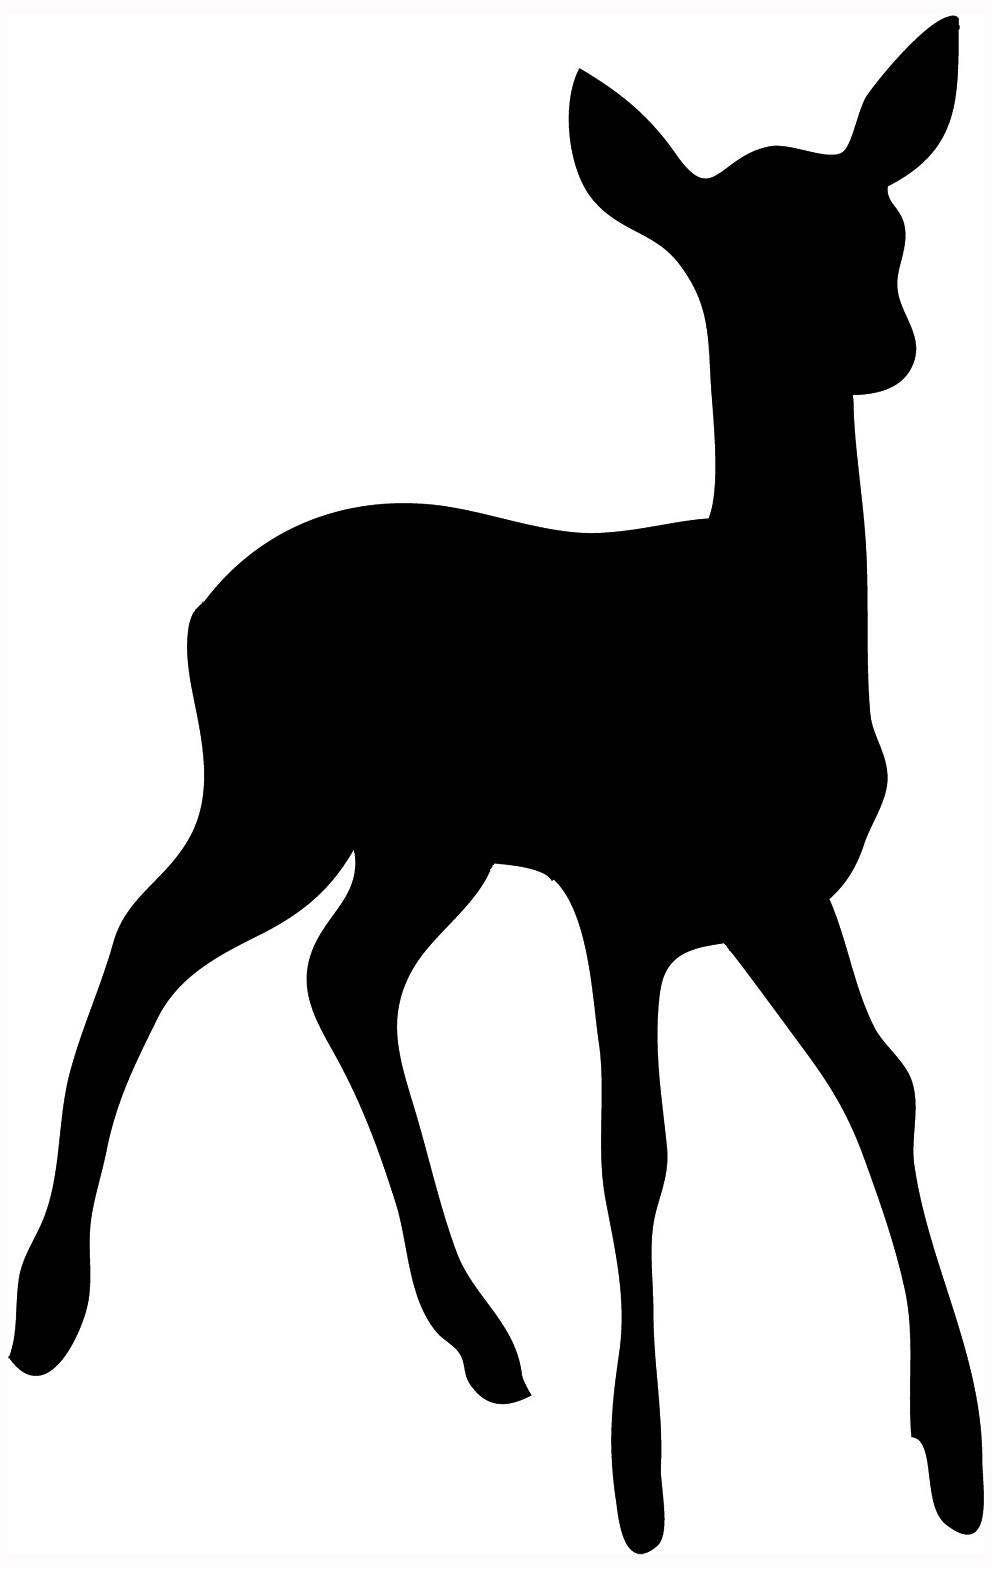 silhouette of stag, silhouette of young deer